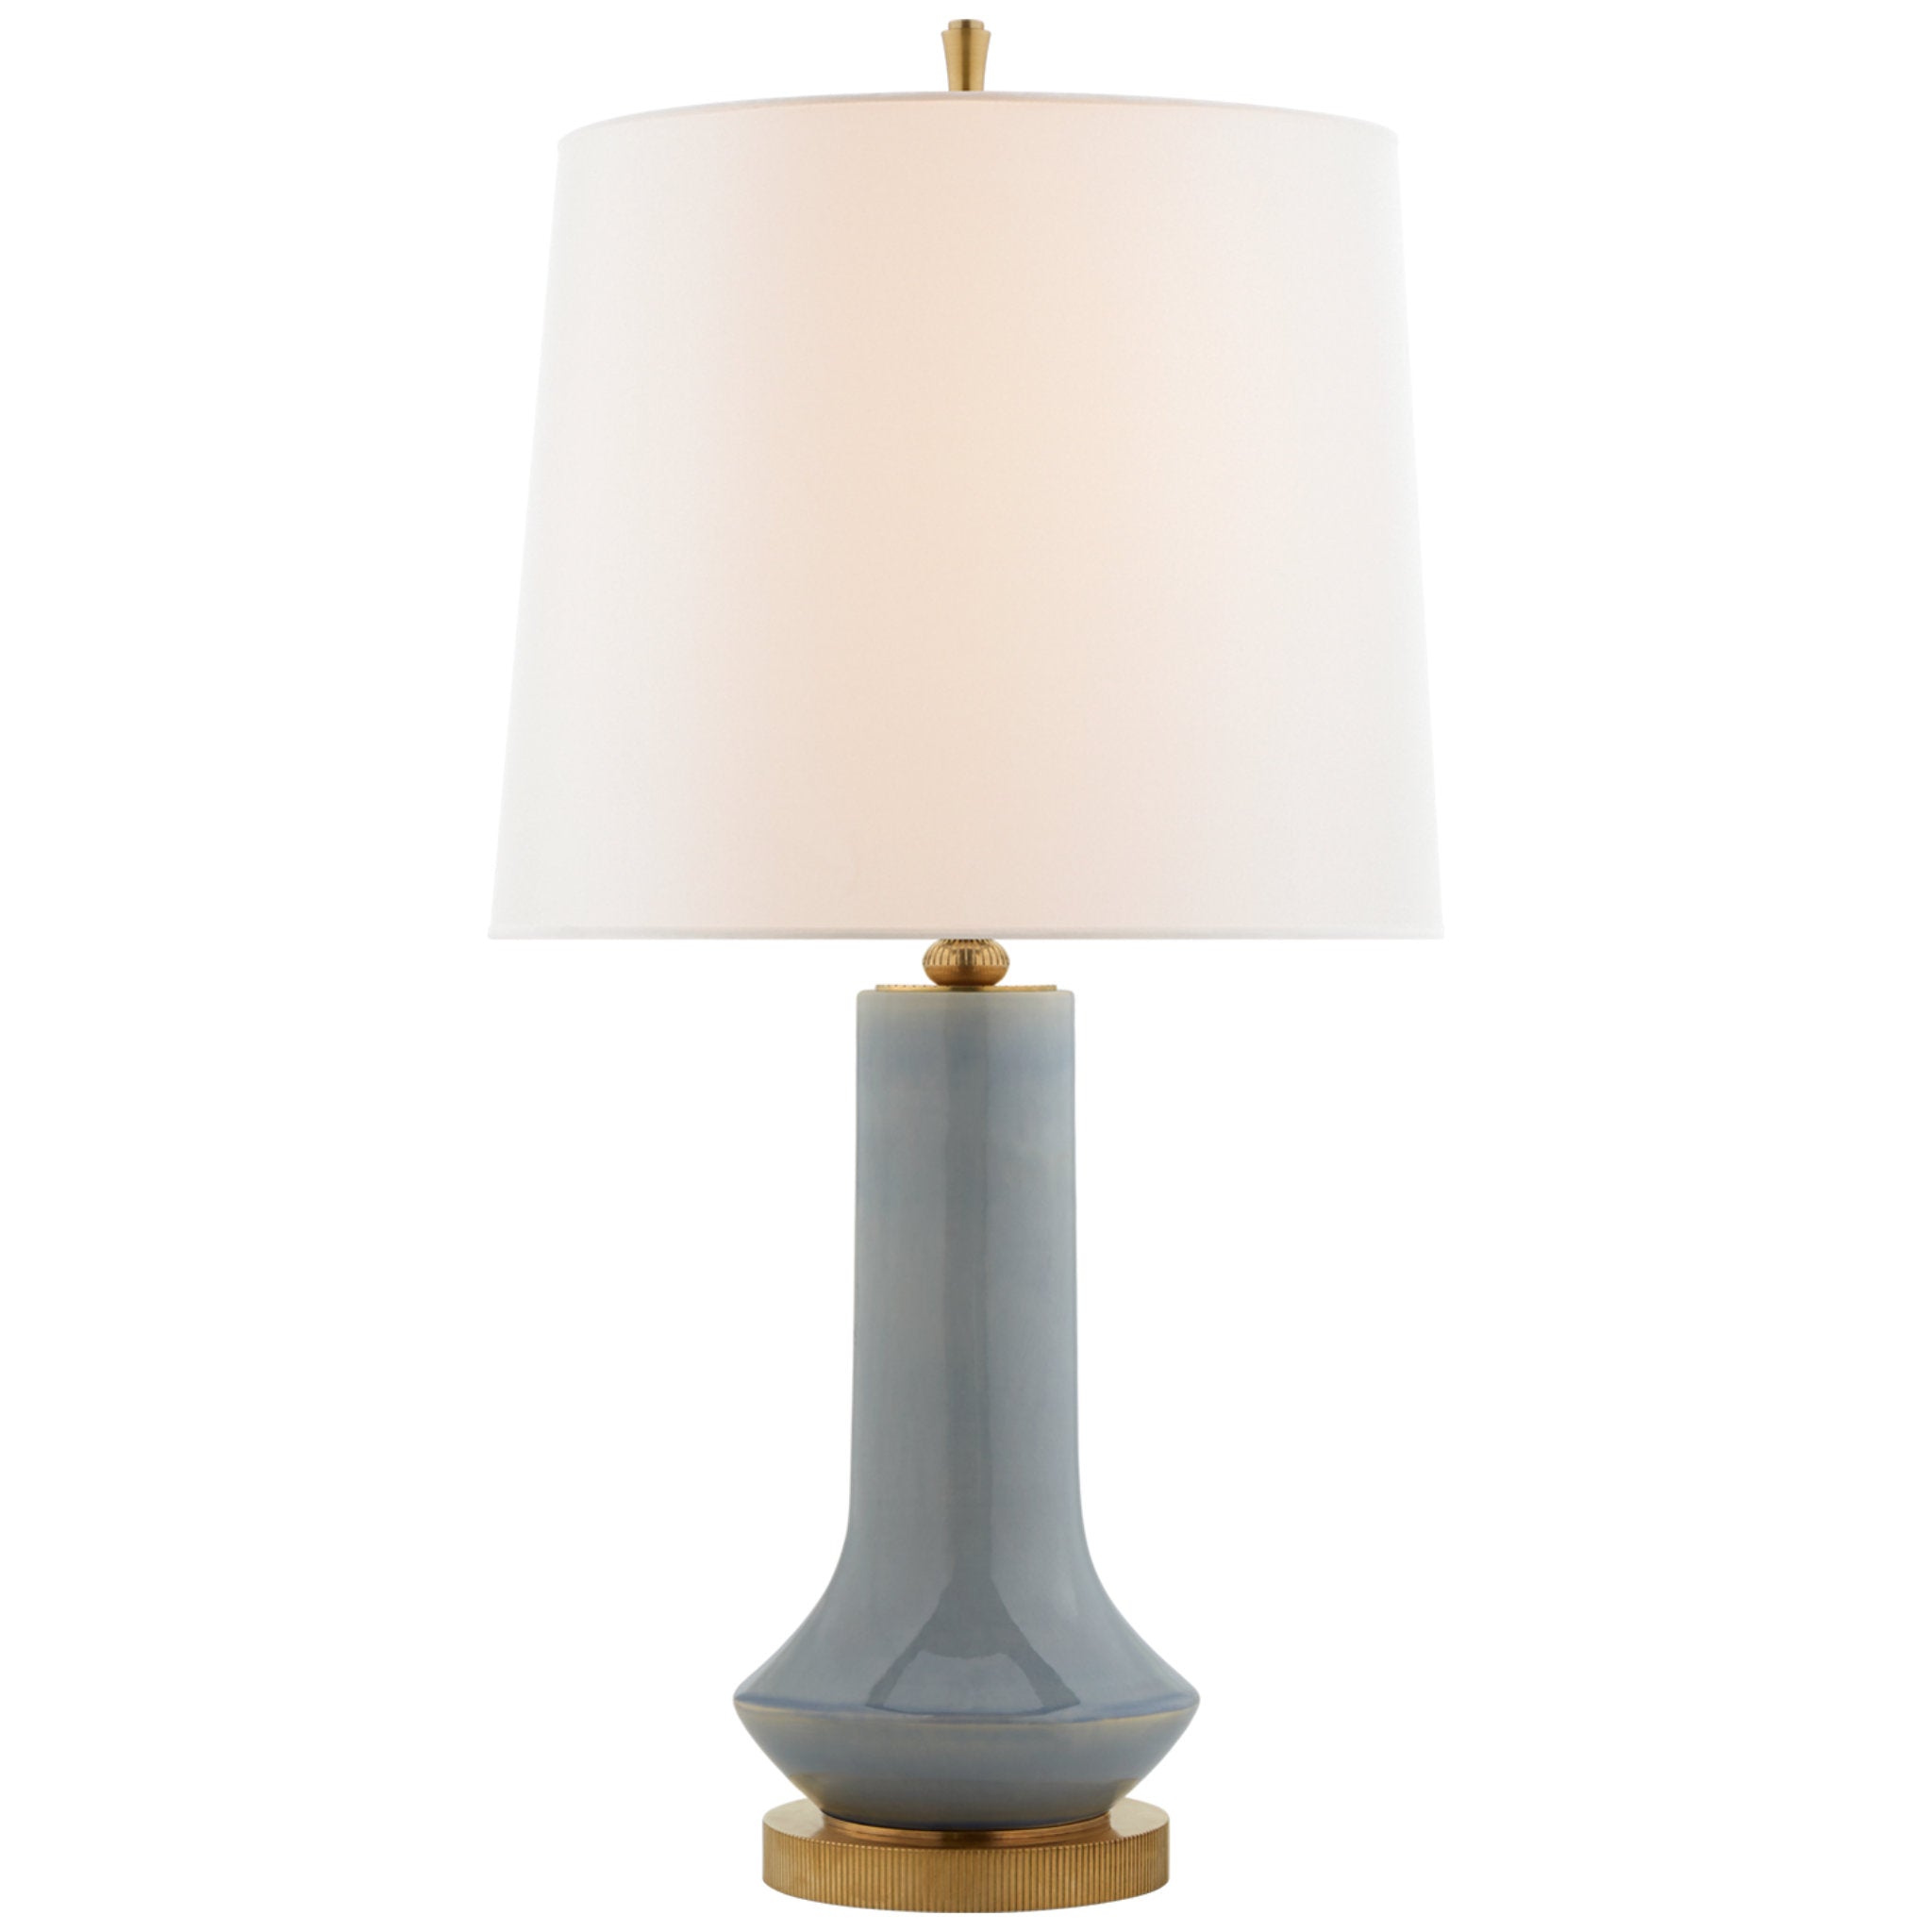 Thomas O'Brien Luisa Large Table Lamp in Polar Blue Crackle with Linen Shade